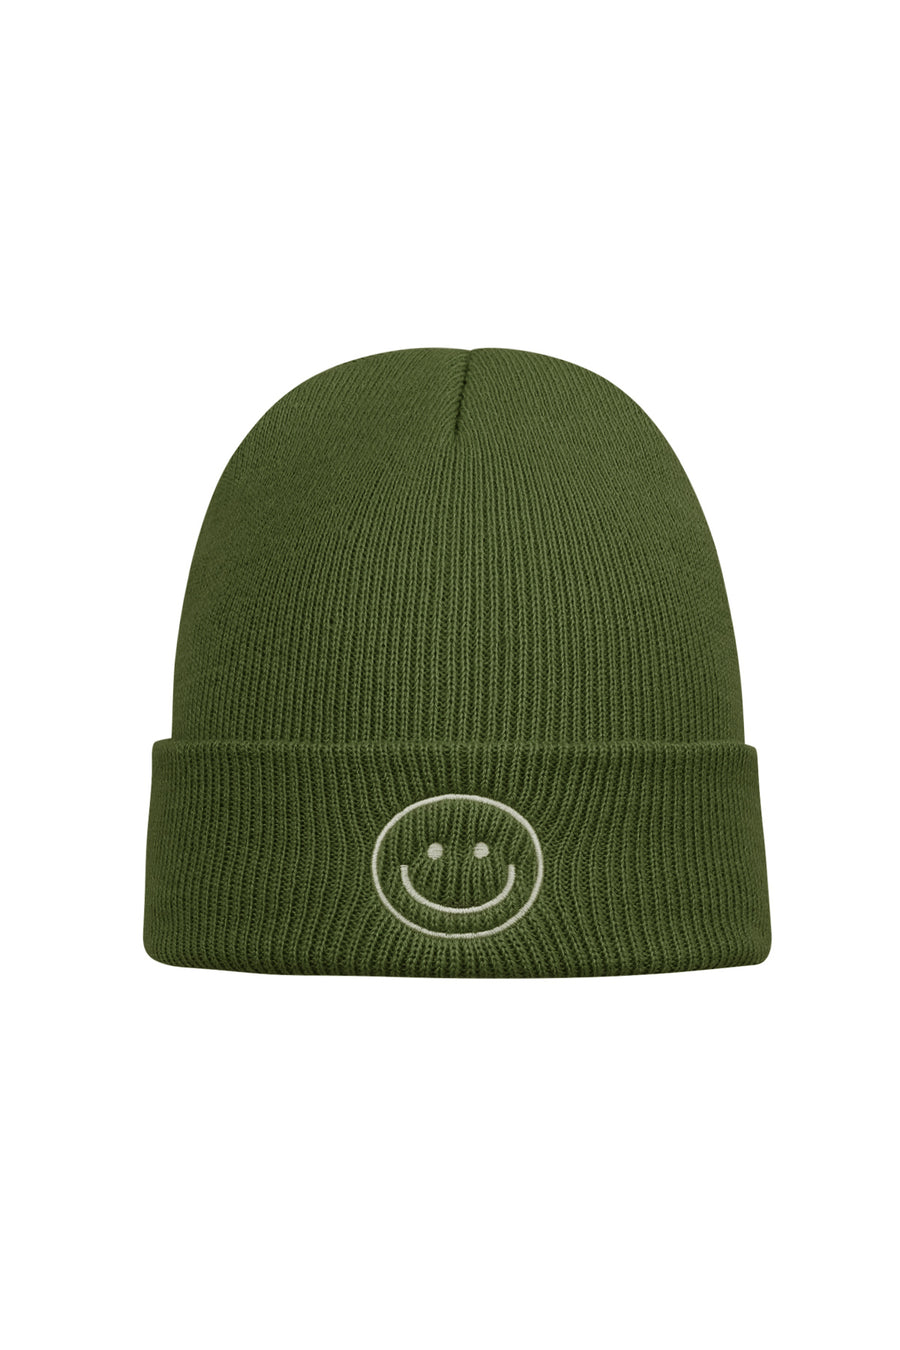 Smiley Beanie Hat - Olive